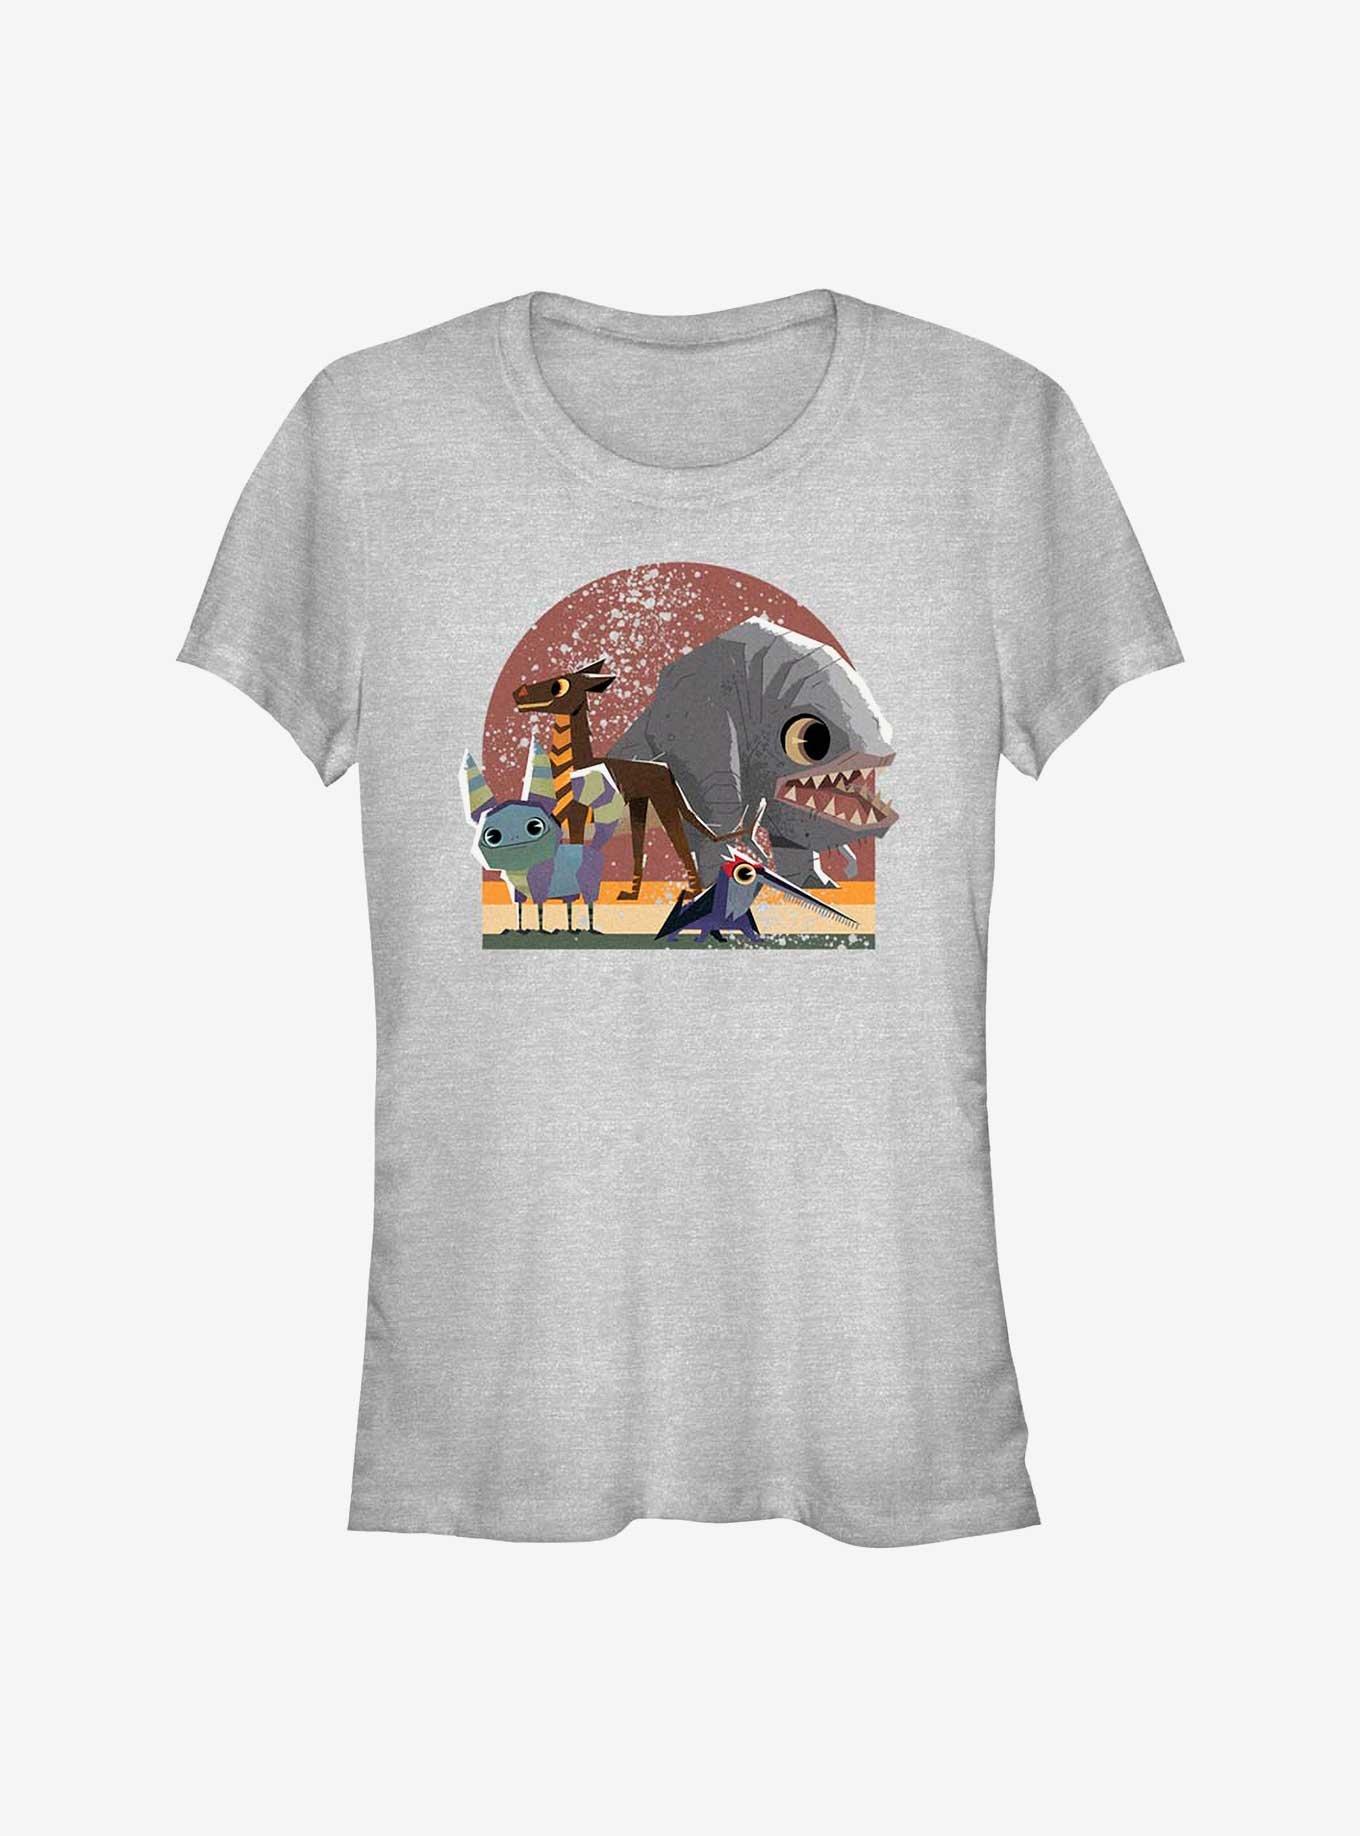 Star Wars: Galaxy Of Creatures Creature Group Girls T-Shirt, ATH HTR, hi-res